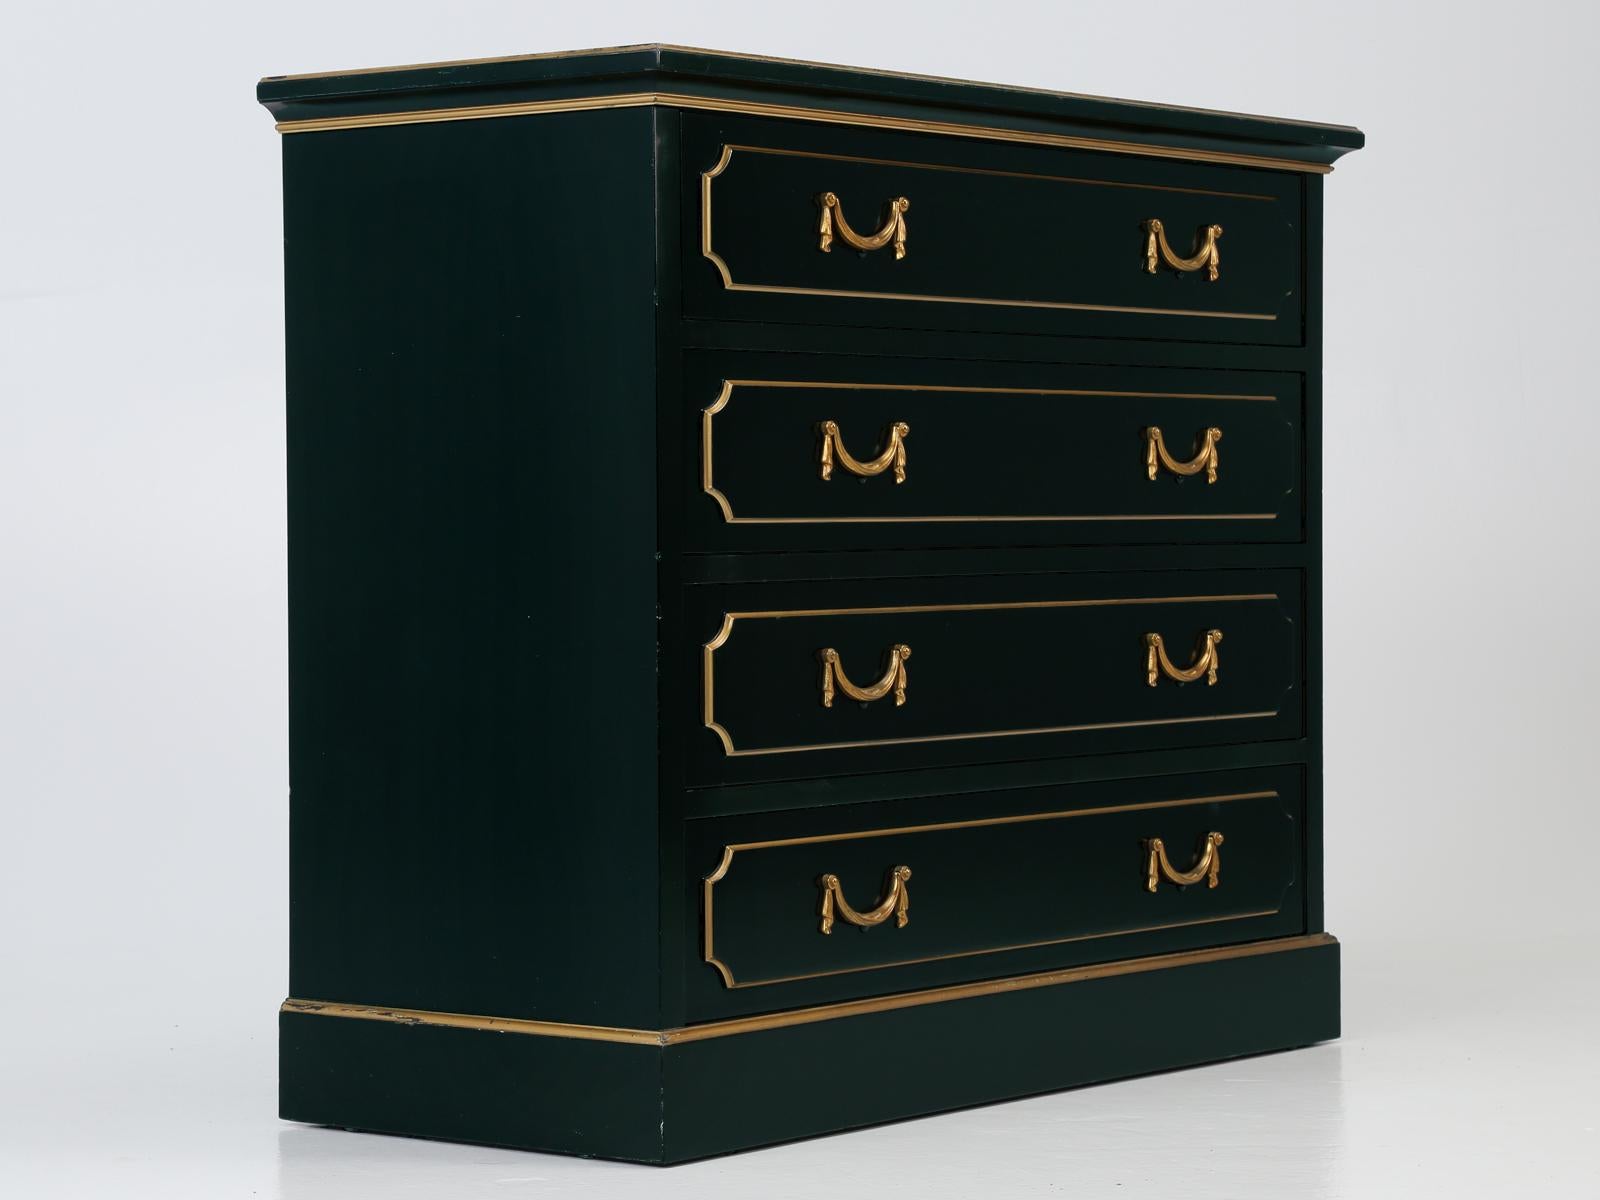 Vintage French commode, is signed by the decorator Maurice Hirsch and was executed in a neoclassical style. Maurice Hirsch was a renowned interior designer, during the 1950s and 1960s. M. Hirch, as he signed his works, was probably best known for